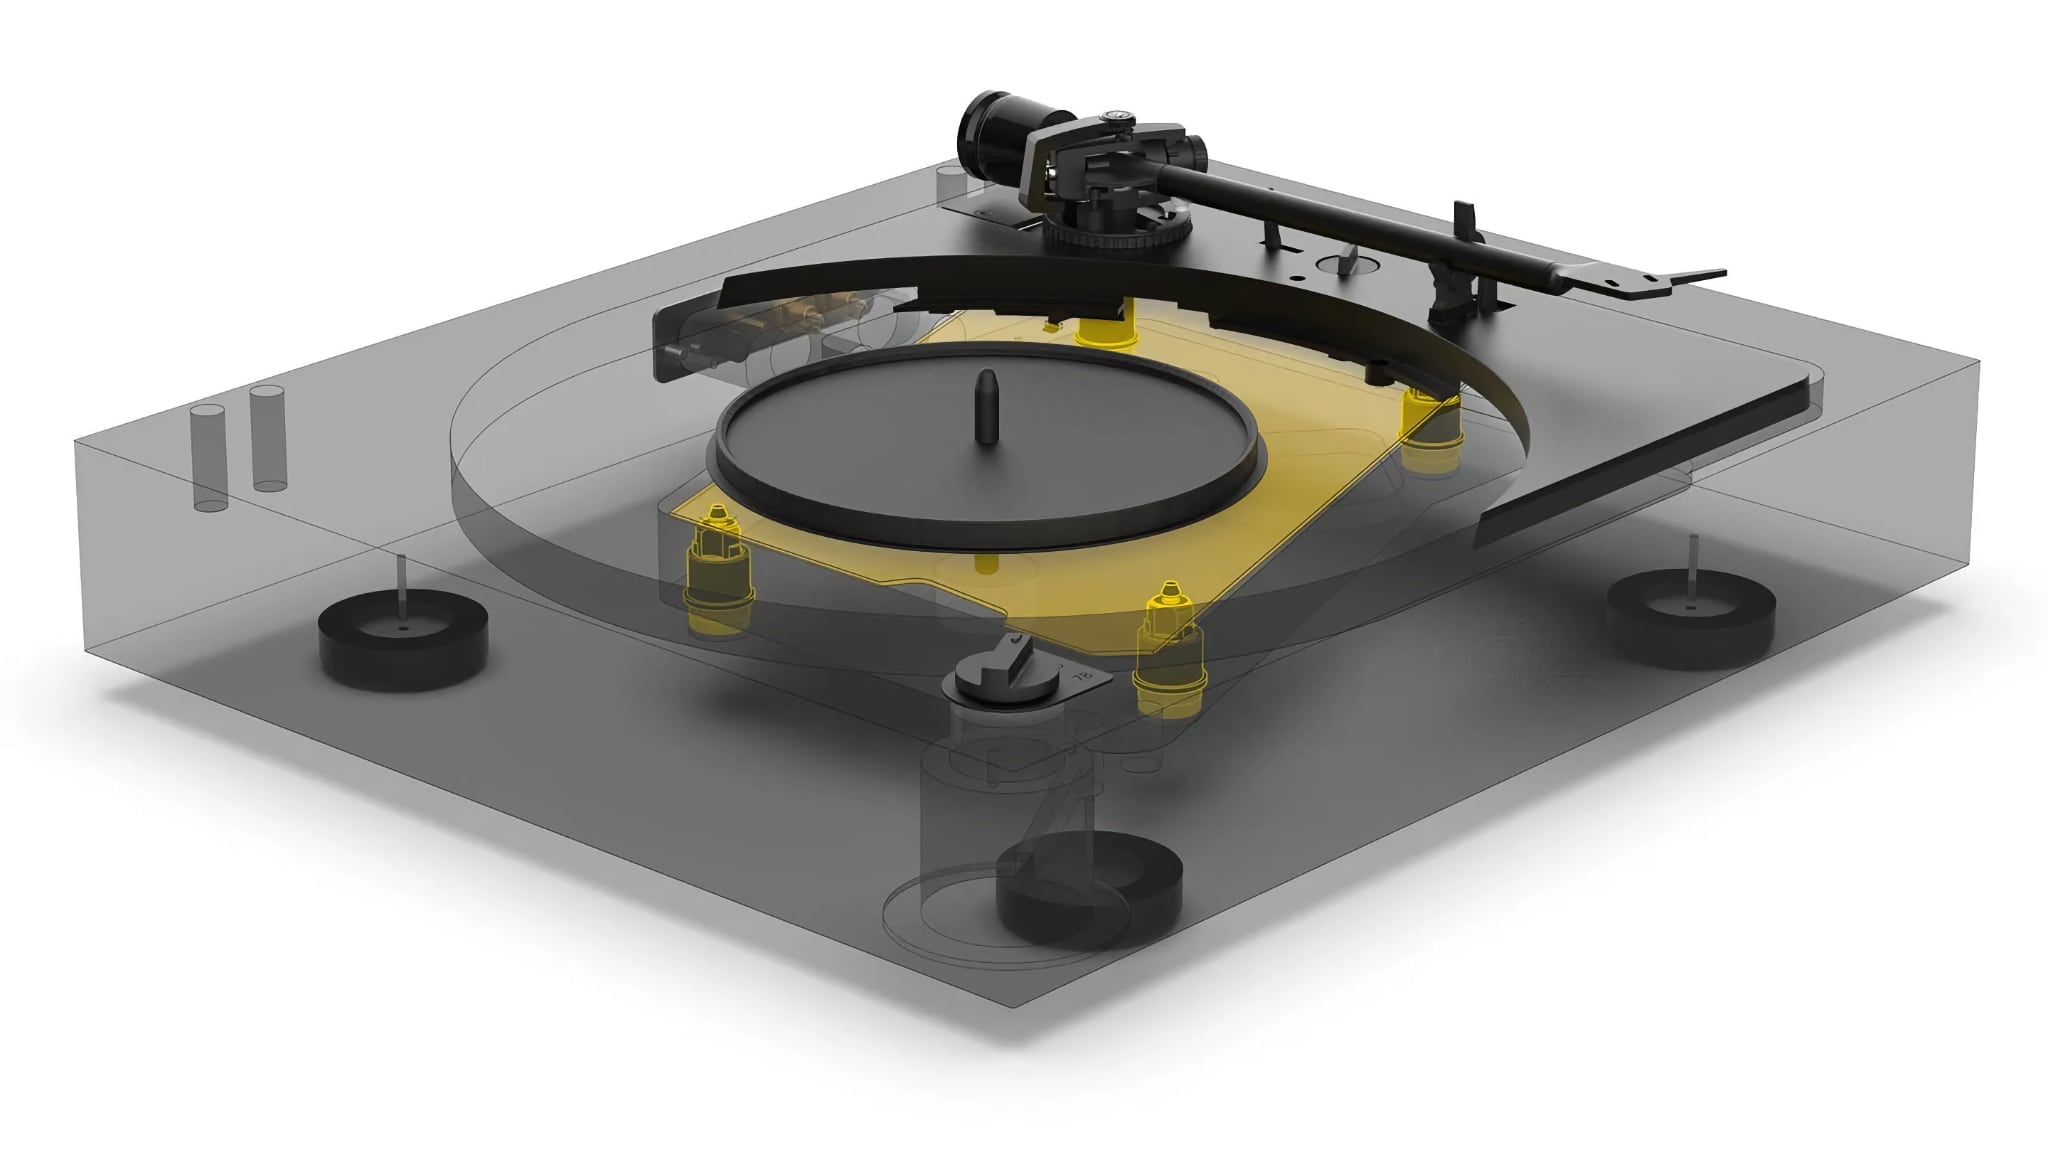 Pro-Ject A2 suspension 3D diagram showing internal components and sub-chassis